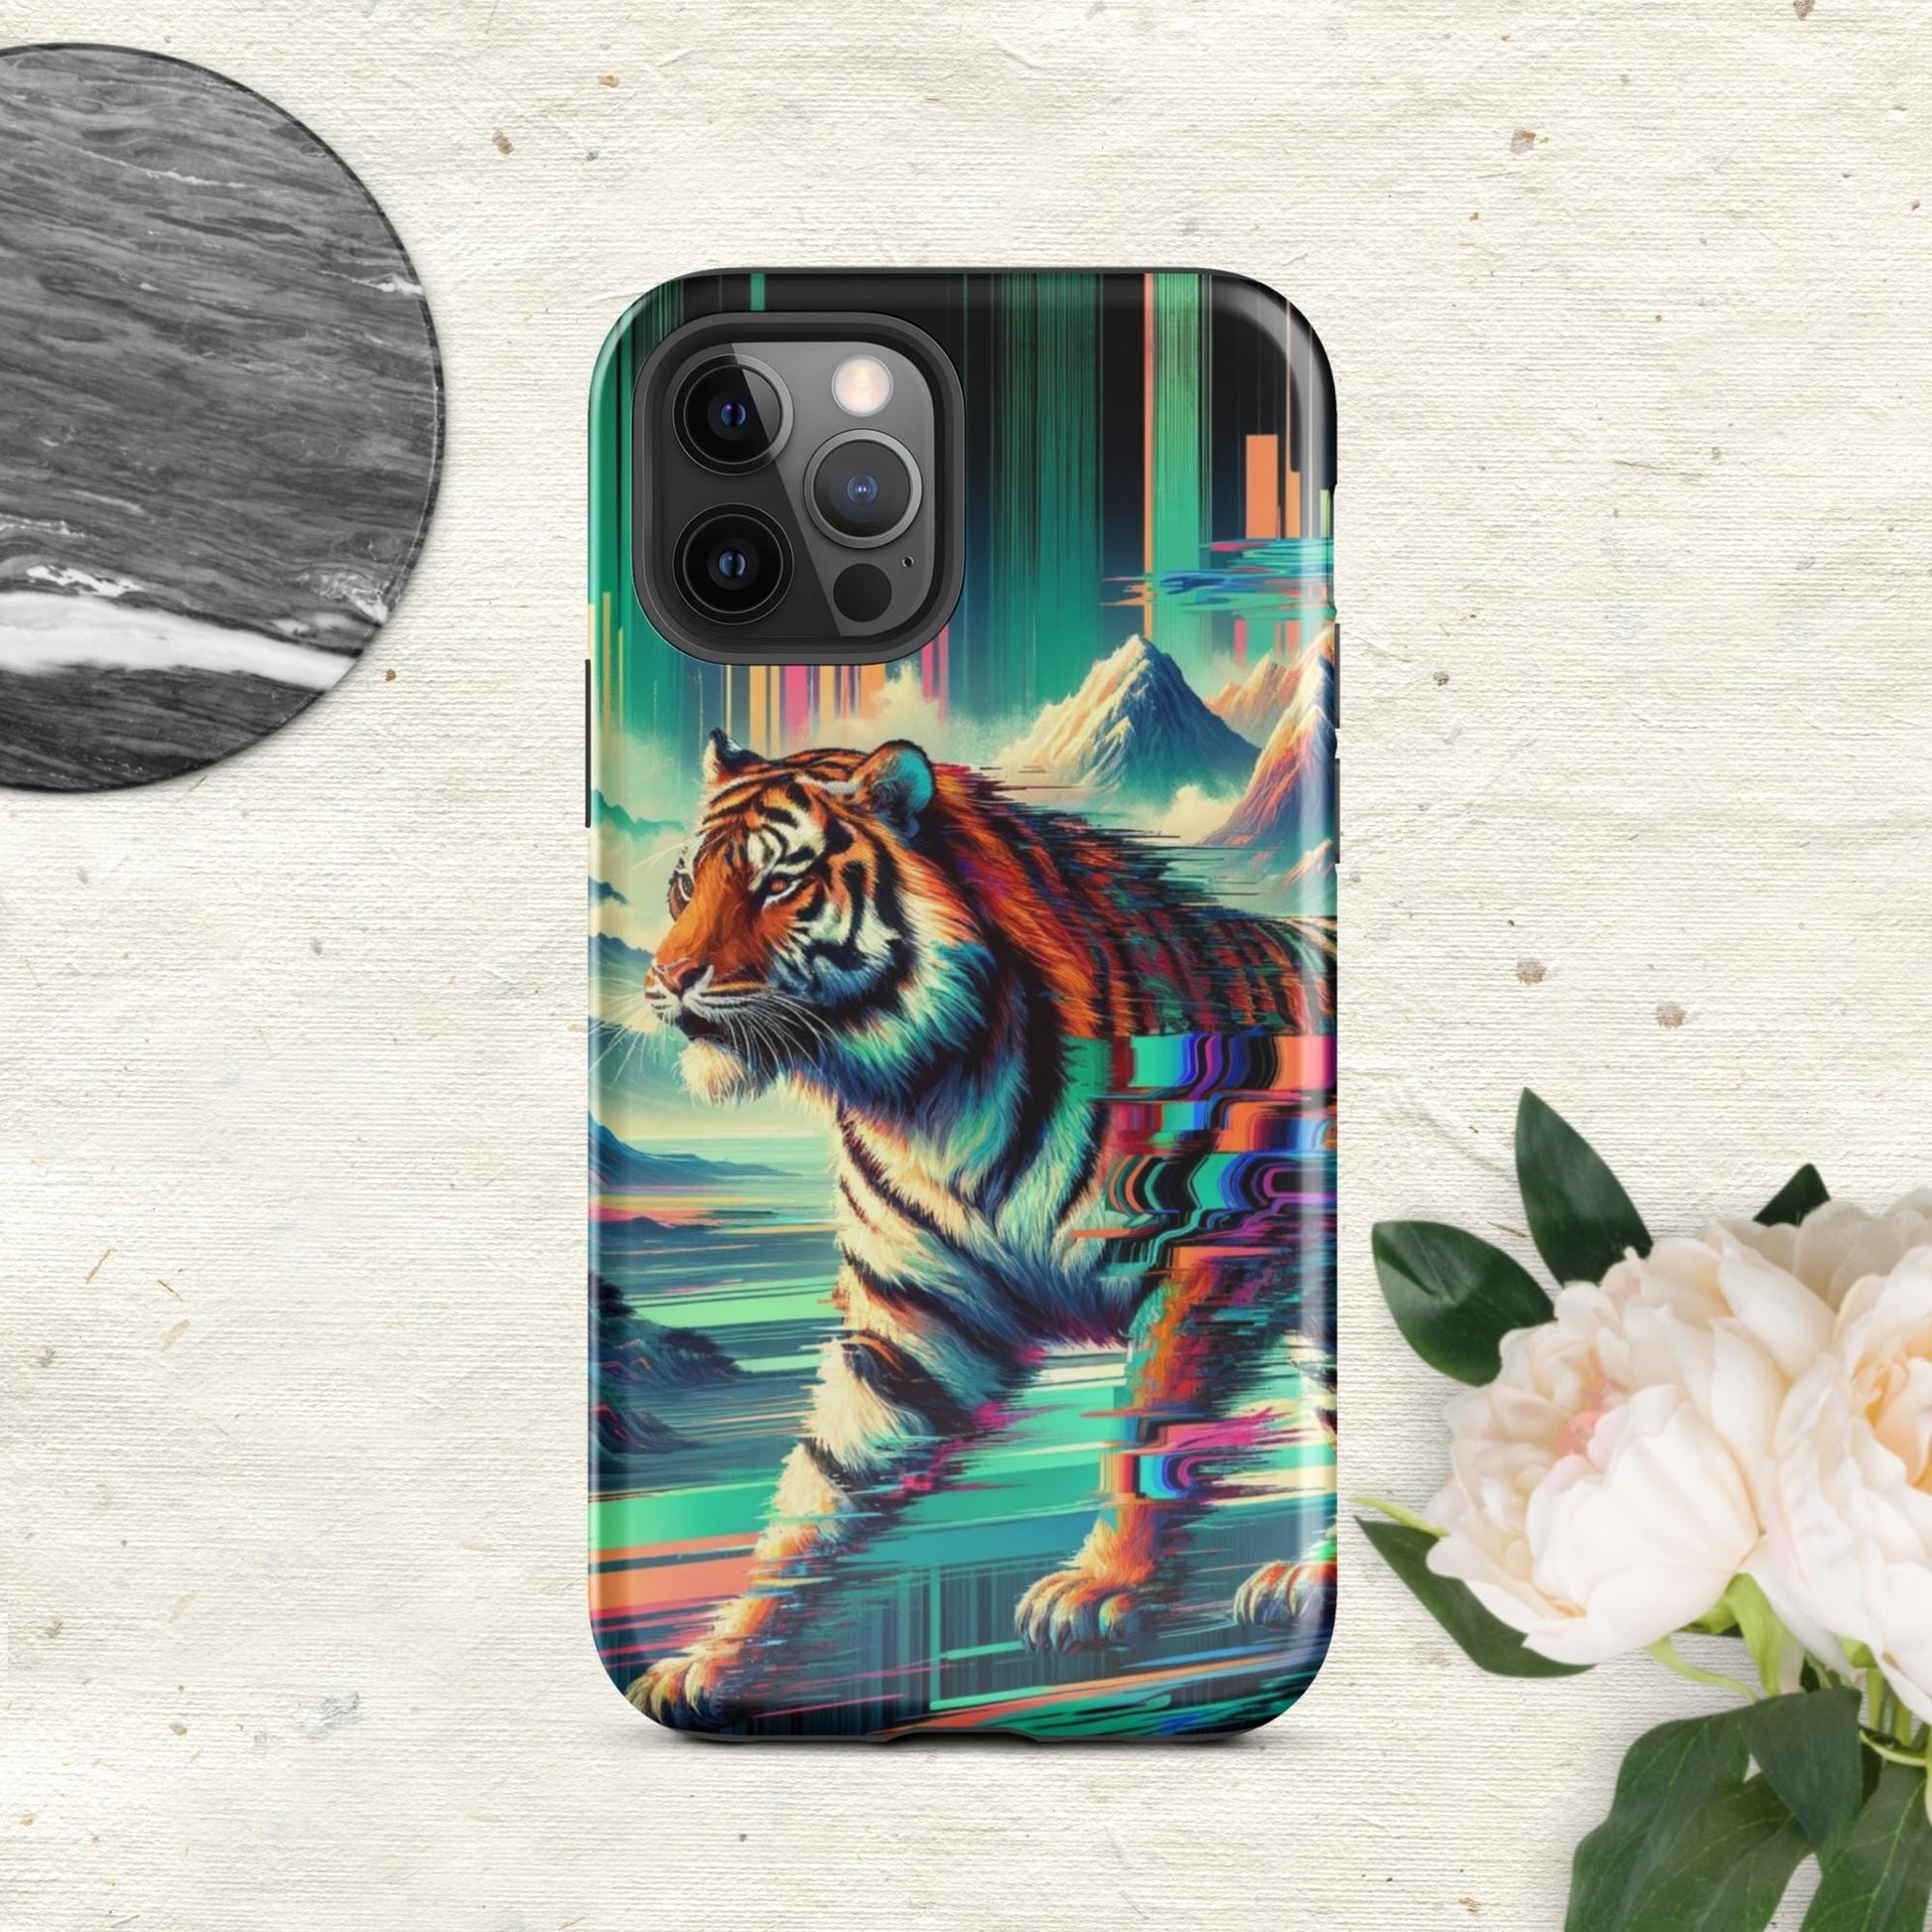 The Hologram Hook Up Glossy / iPhone 12 Pro Tiger Glitch Tough Case for iPhone®